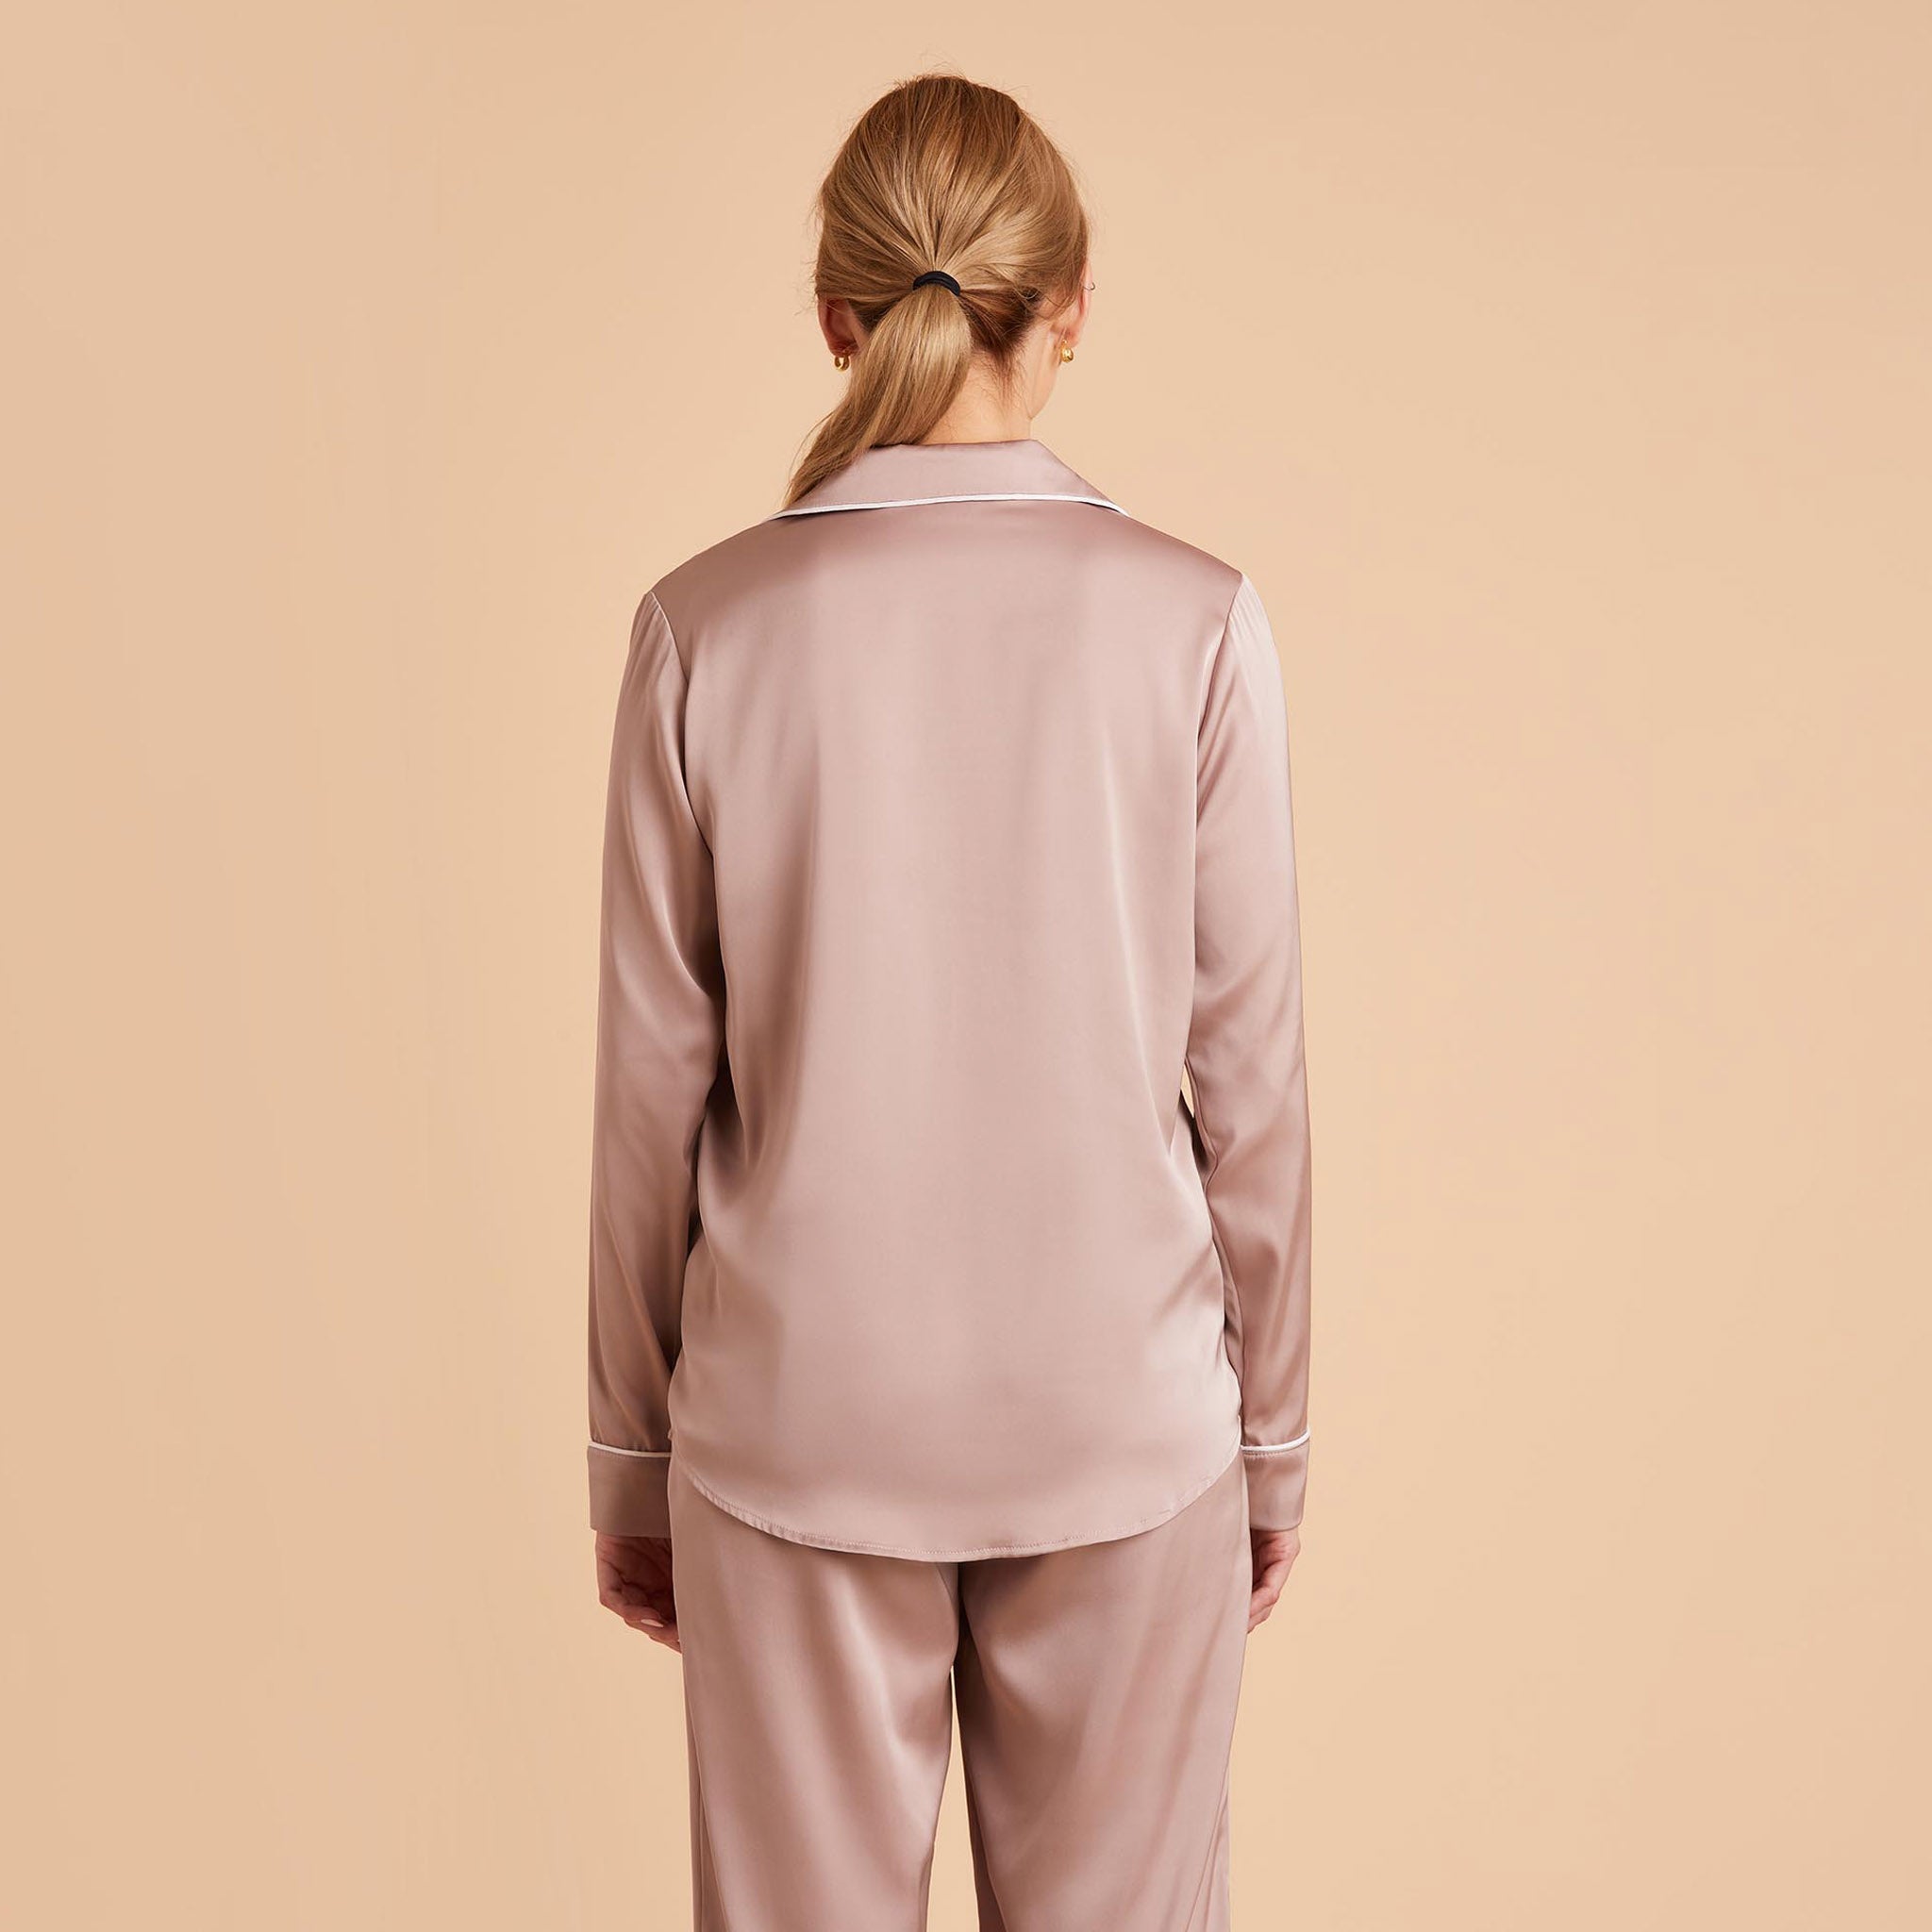 Jonny Satin Long Sleeve Pajama Top With White Piping in mauve taupe, back view